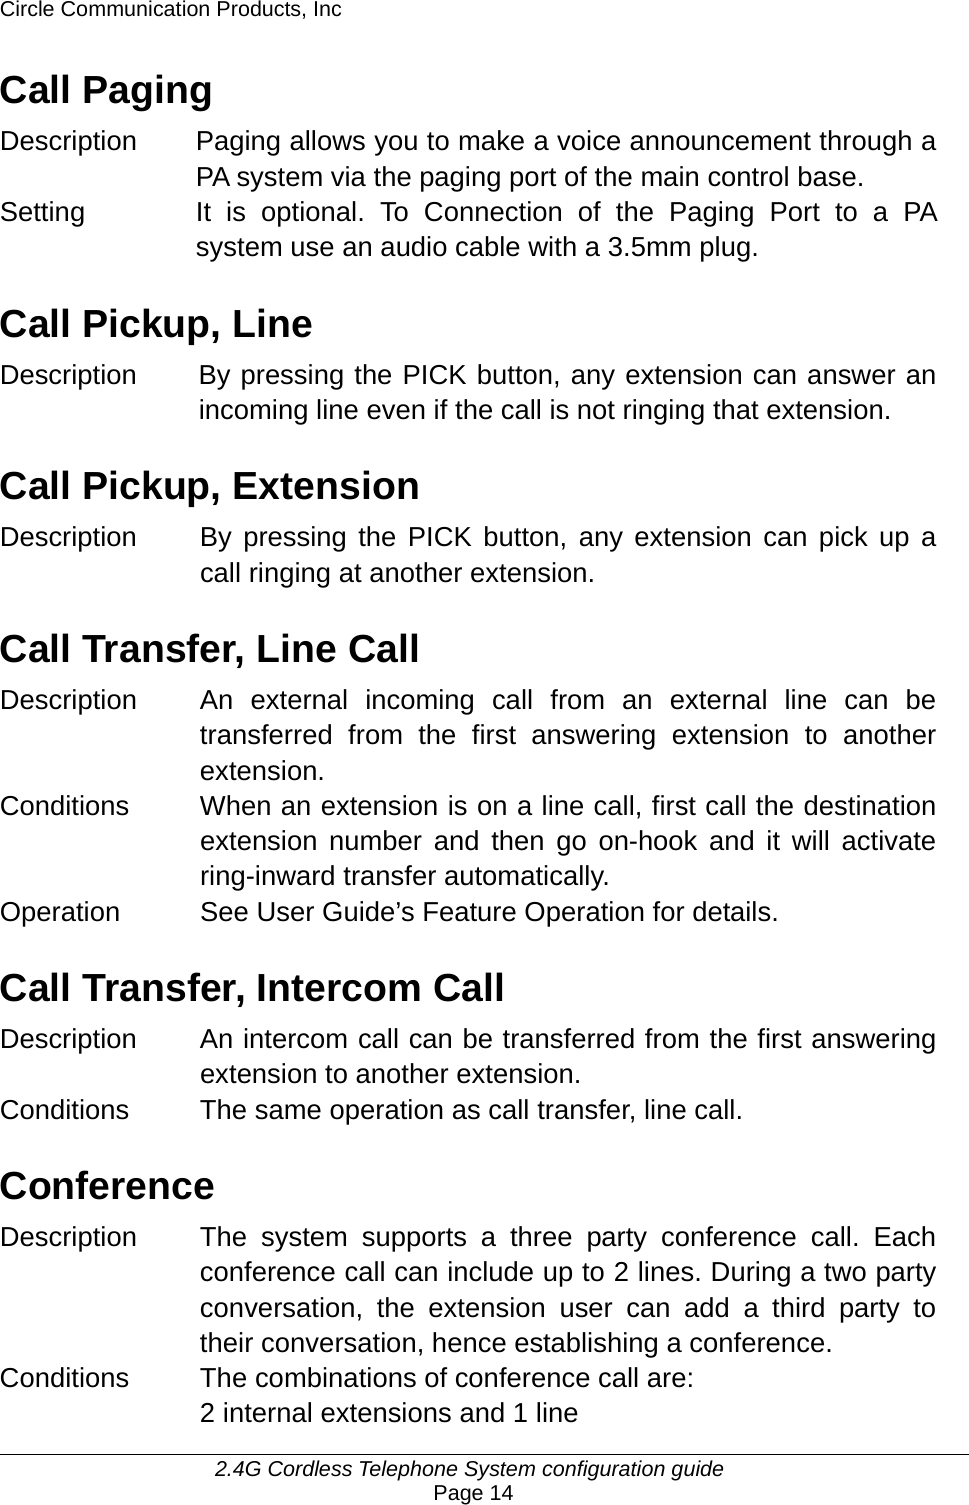 Circle Communication Products, Inc     2.4G Cordless Telephone System configuration guide Page 14 Call Paging Description Paging allows you to make a voice announcement through a PA system via the paging port of the main control base. Setting  It is optional. To Connection of the Paging Port to a PA system use an audio cable with a 3.5mm plug.  Call Pickup, Line Description  By pressing the PICK button, any extension can answer an incoming line even if the call is not ringing that extension.    Call Pickup, Extension Description  By pressing the PICK button, any extension can pick up a call ringing at another extension.    Call Transfer, Line Call Description An external incoming call from an external line can be transferred from the first answering extension to another extension.  Conditions  When an extension is on a line call, first call the destination extension number and then go on-hook and it will activate ring-inward transfer automatically. Operation  See User Guide’s Feature Operation for details.  Call Transfer, Intercom Call Description An intercom call can be transferred from the first answering extension to another extension.   Conditions The same operation as call transfer, line call.  Conference Description  The system supports a three party conference call. Each conference call can include up to 2 lines. During a two party conversation, the extension user can add a third party to their conversation, hence establishing a conference.   Conditions  The combinations of conference call are:   2 internal extensions and 1 line 